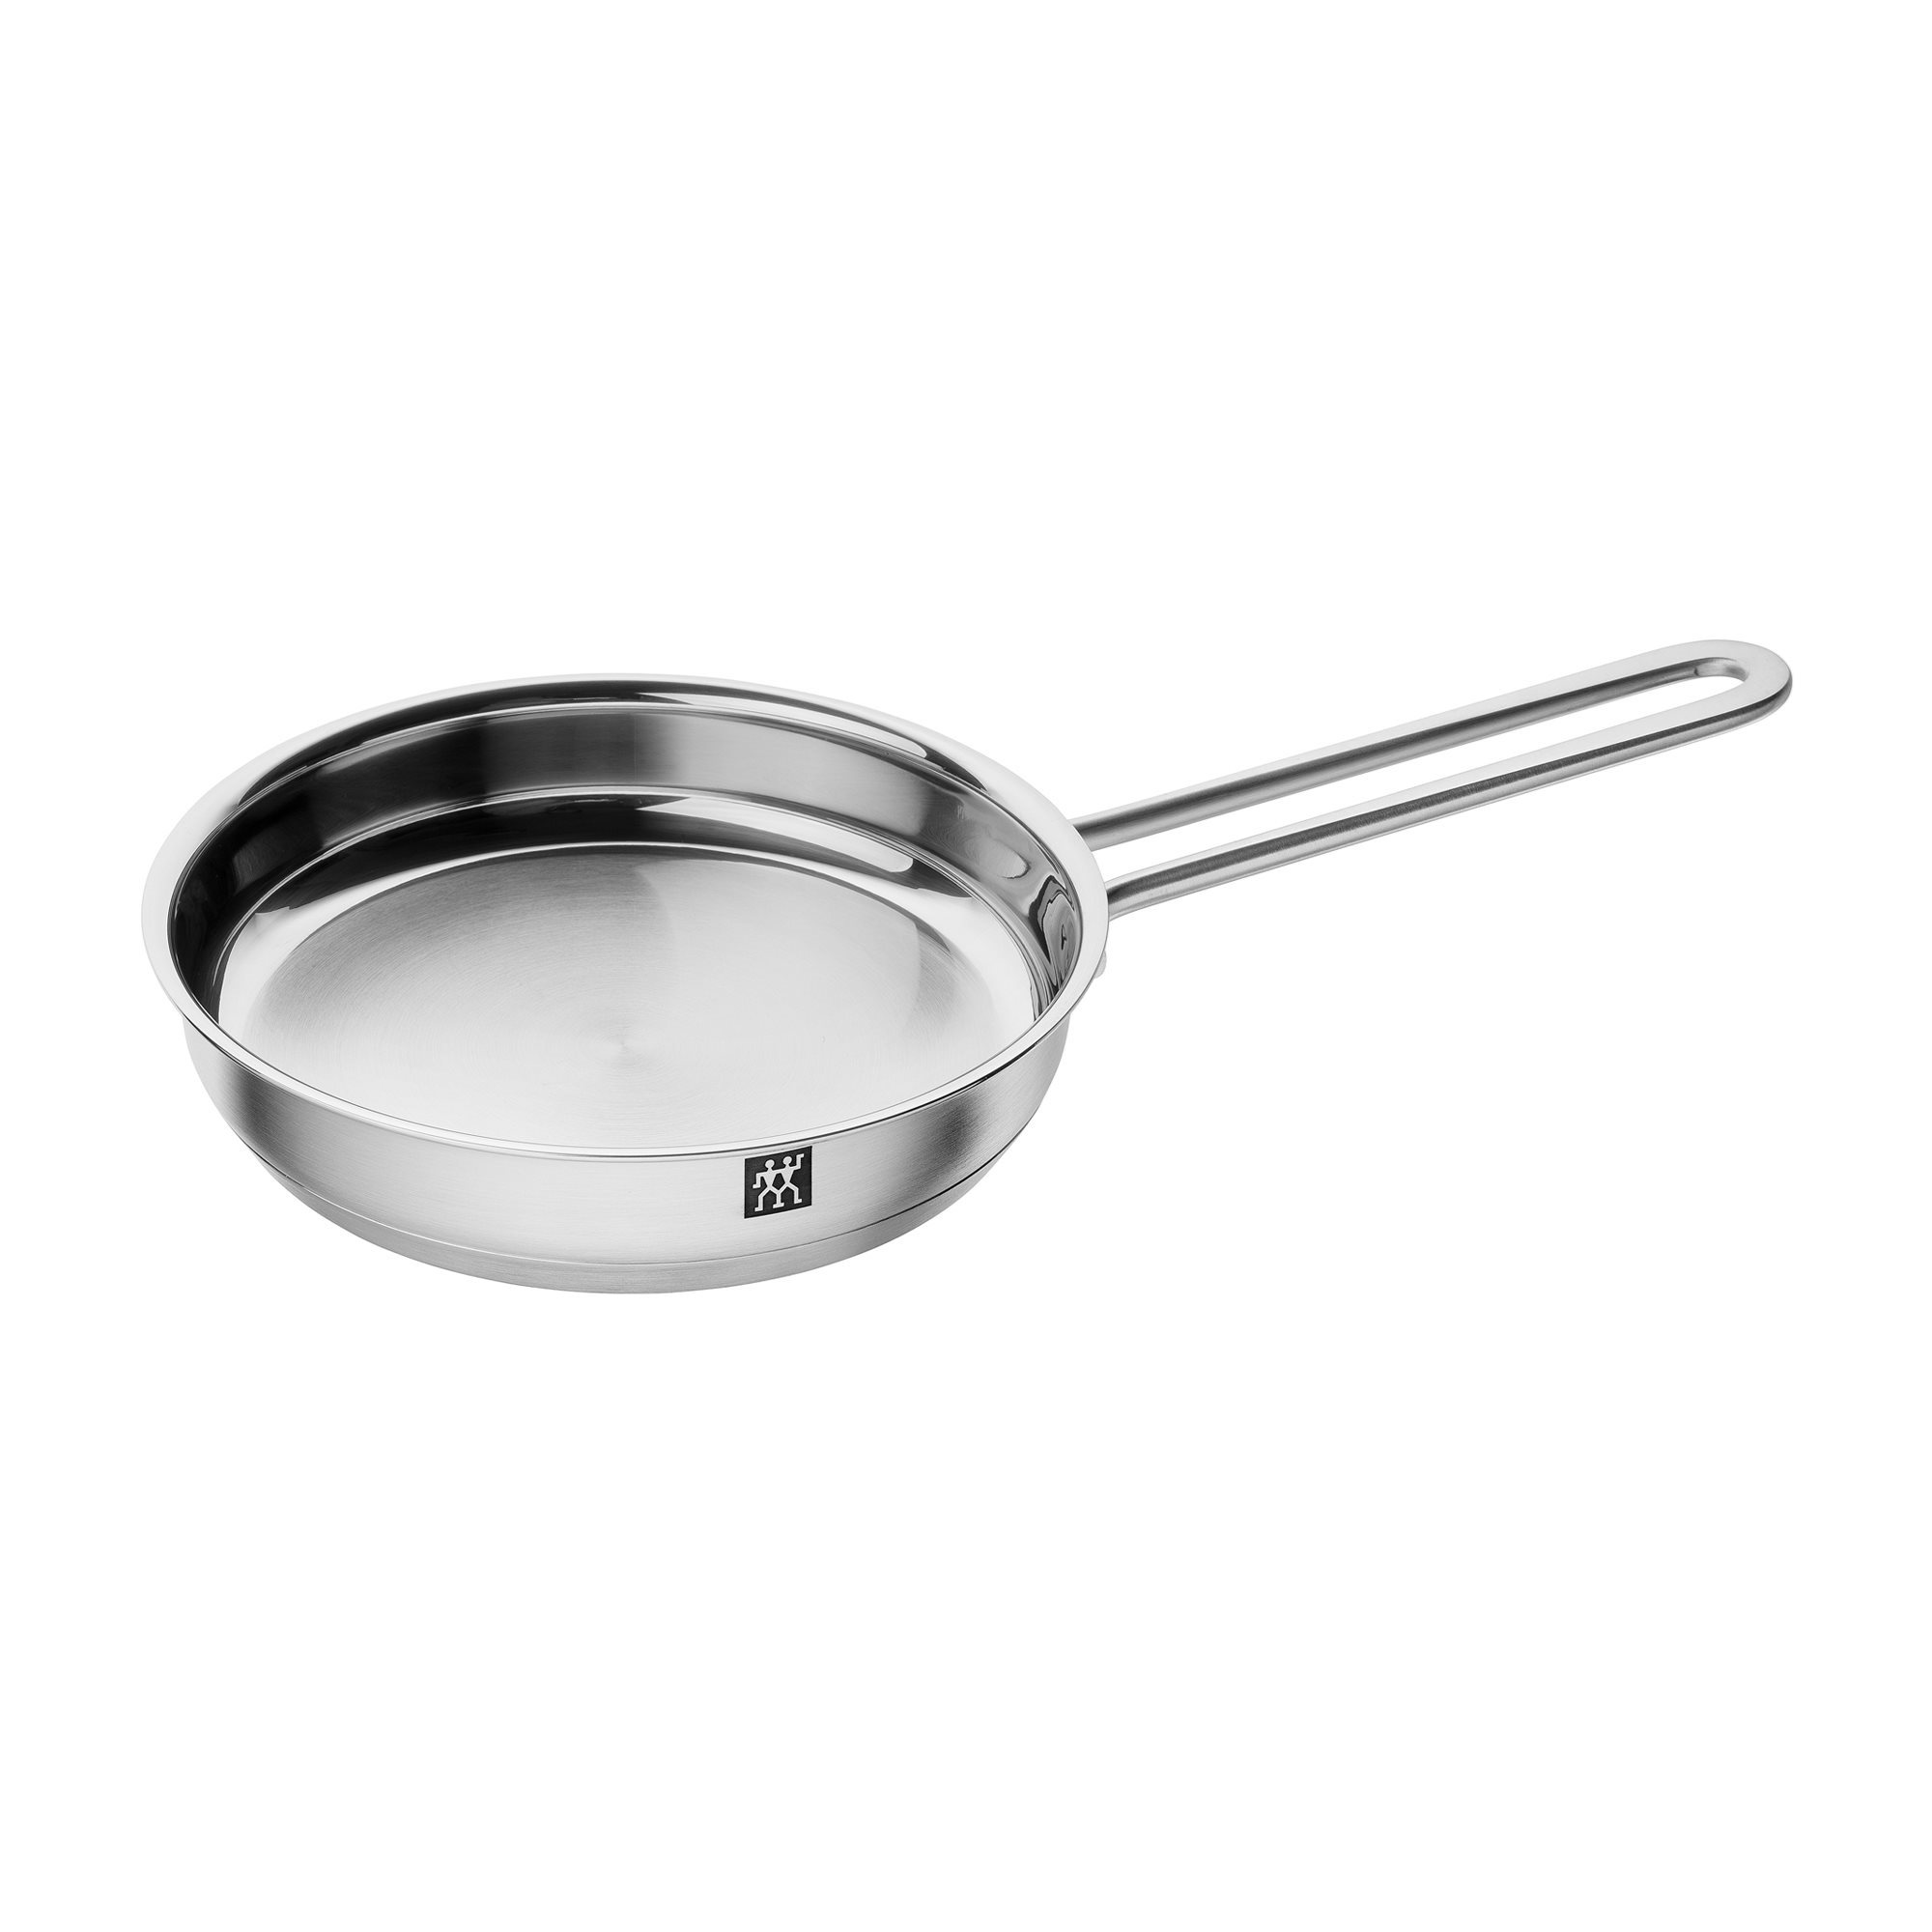 Stainless steel frying cm, 16 KitchenShop Zwilling brand <<Pico>> | - pan